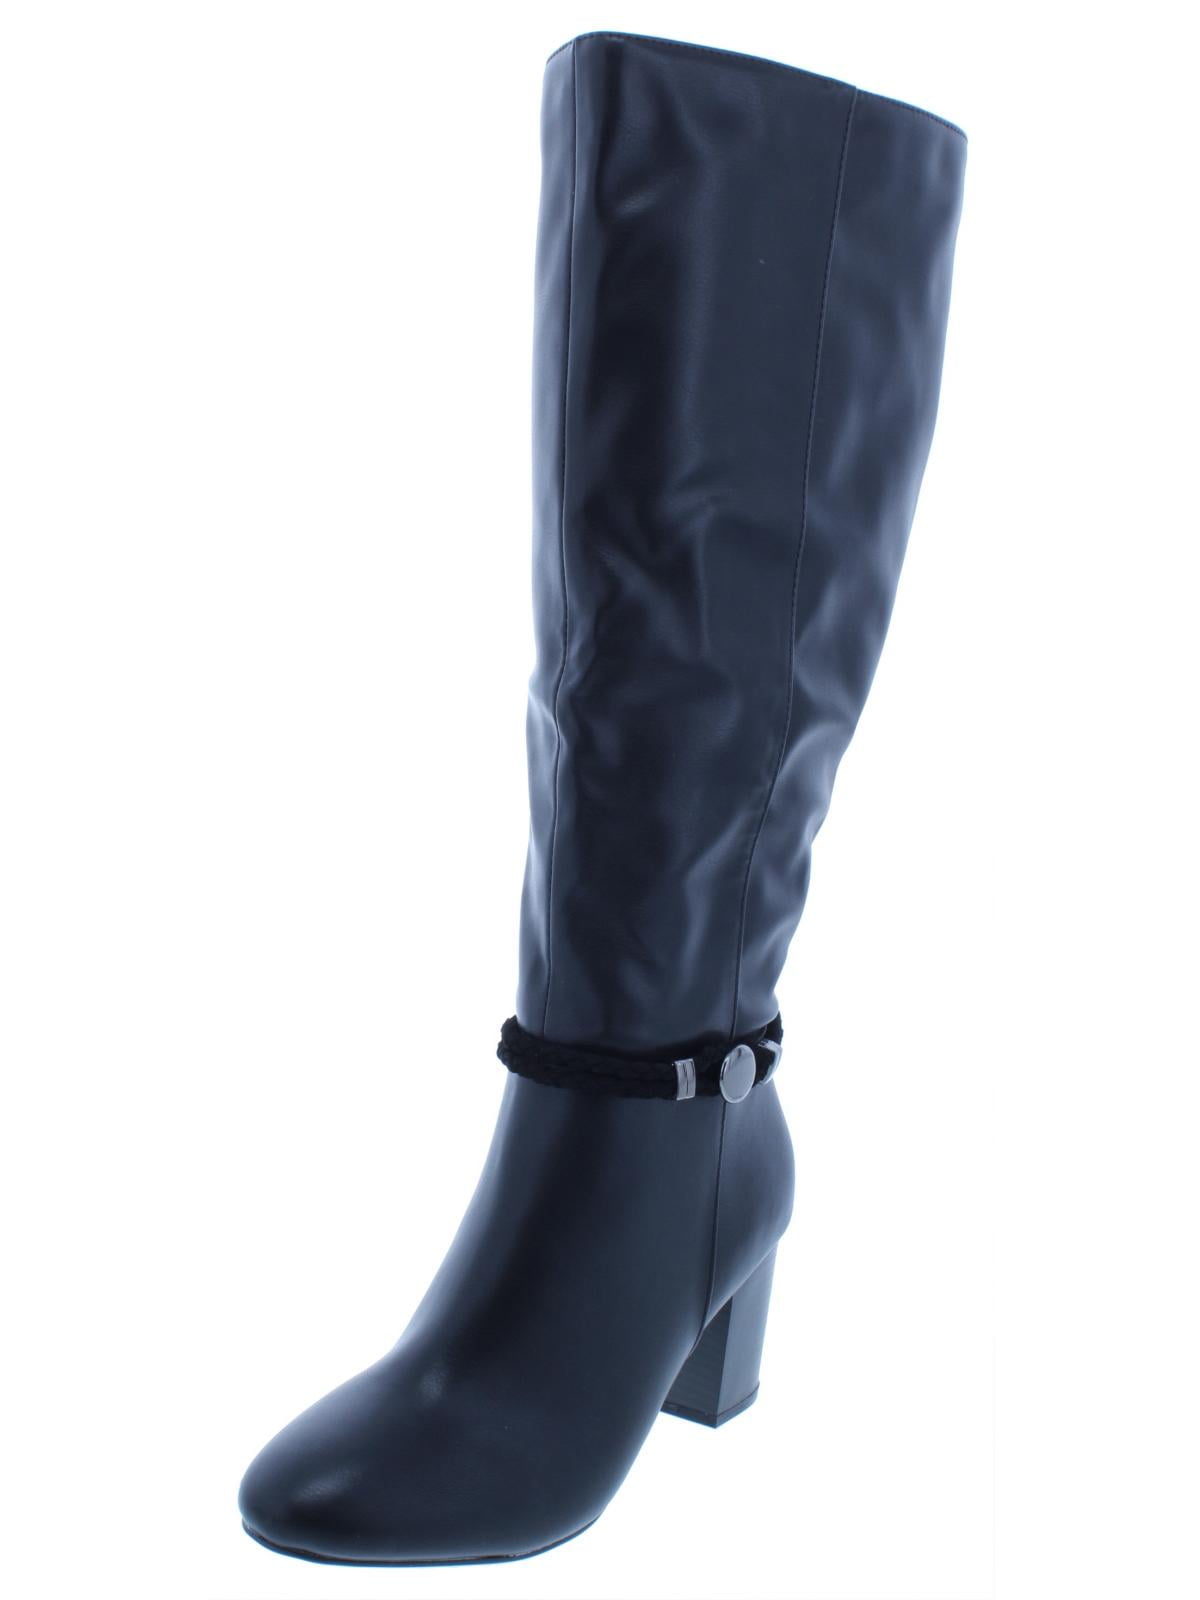 Women's Sophiie Rushed Stacked Heel Knee-High Boots Style & Co 